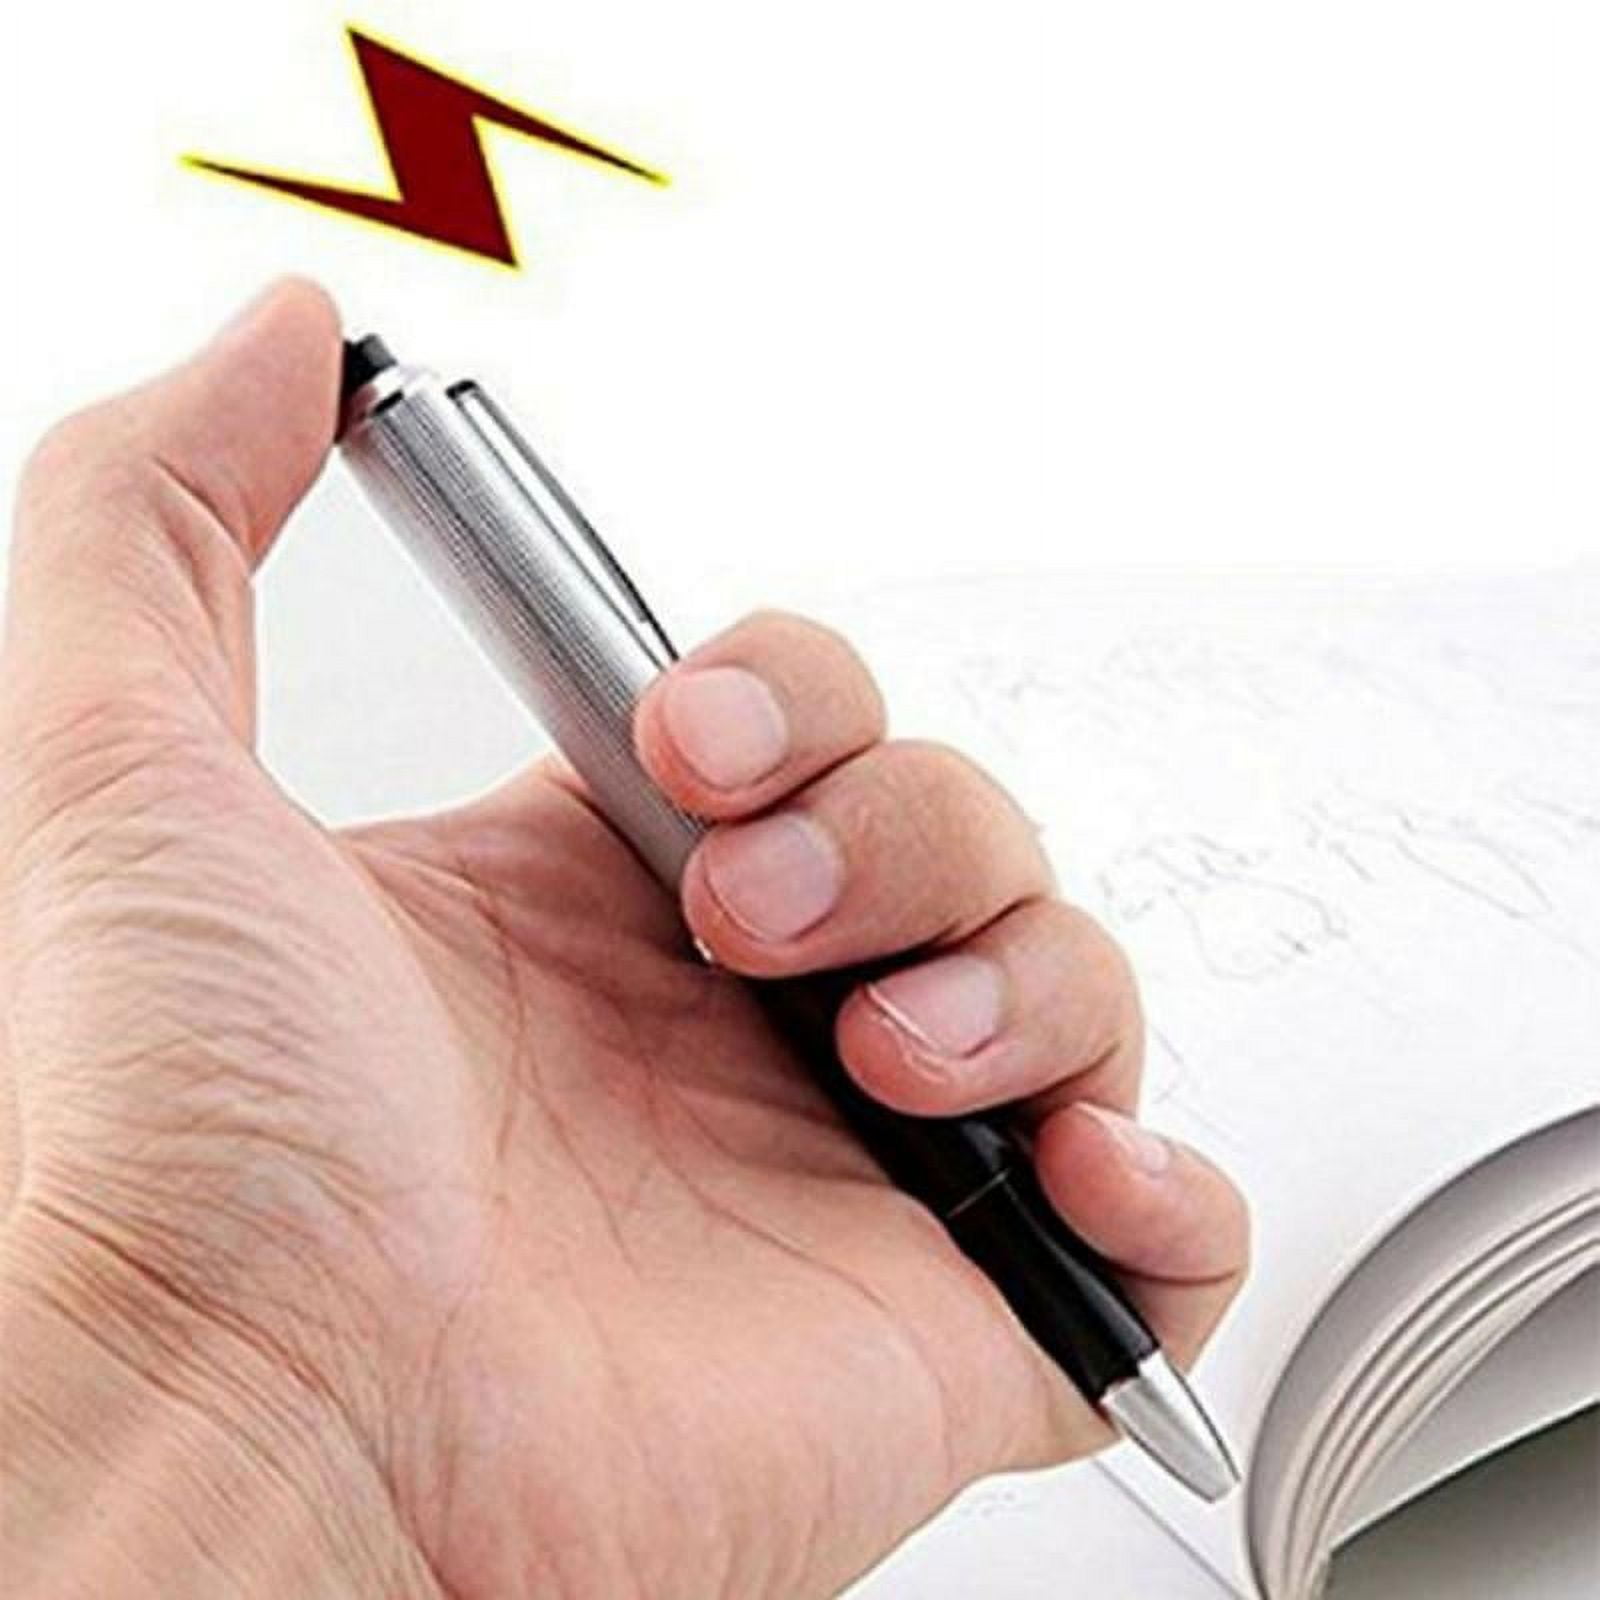 10Pcs Pack Shock Pen Hilarious Electric Shocking Pen Prank and Game - Trick  Your Friends and Family - Funny Prank Stuff and Shocker Toys - Novelty Gag